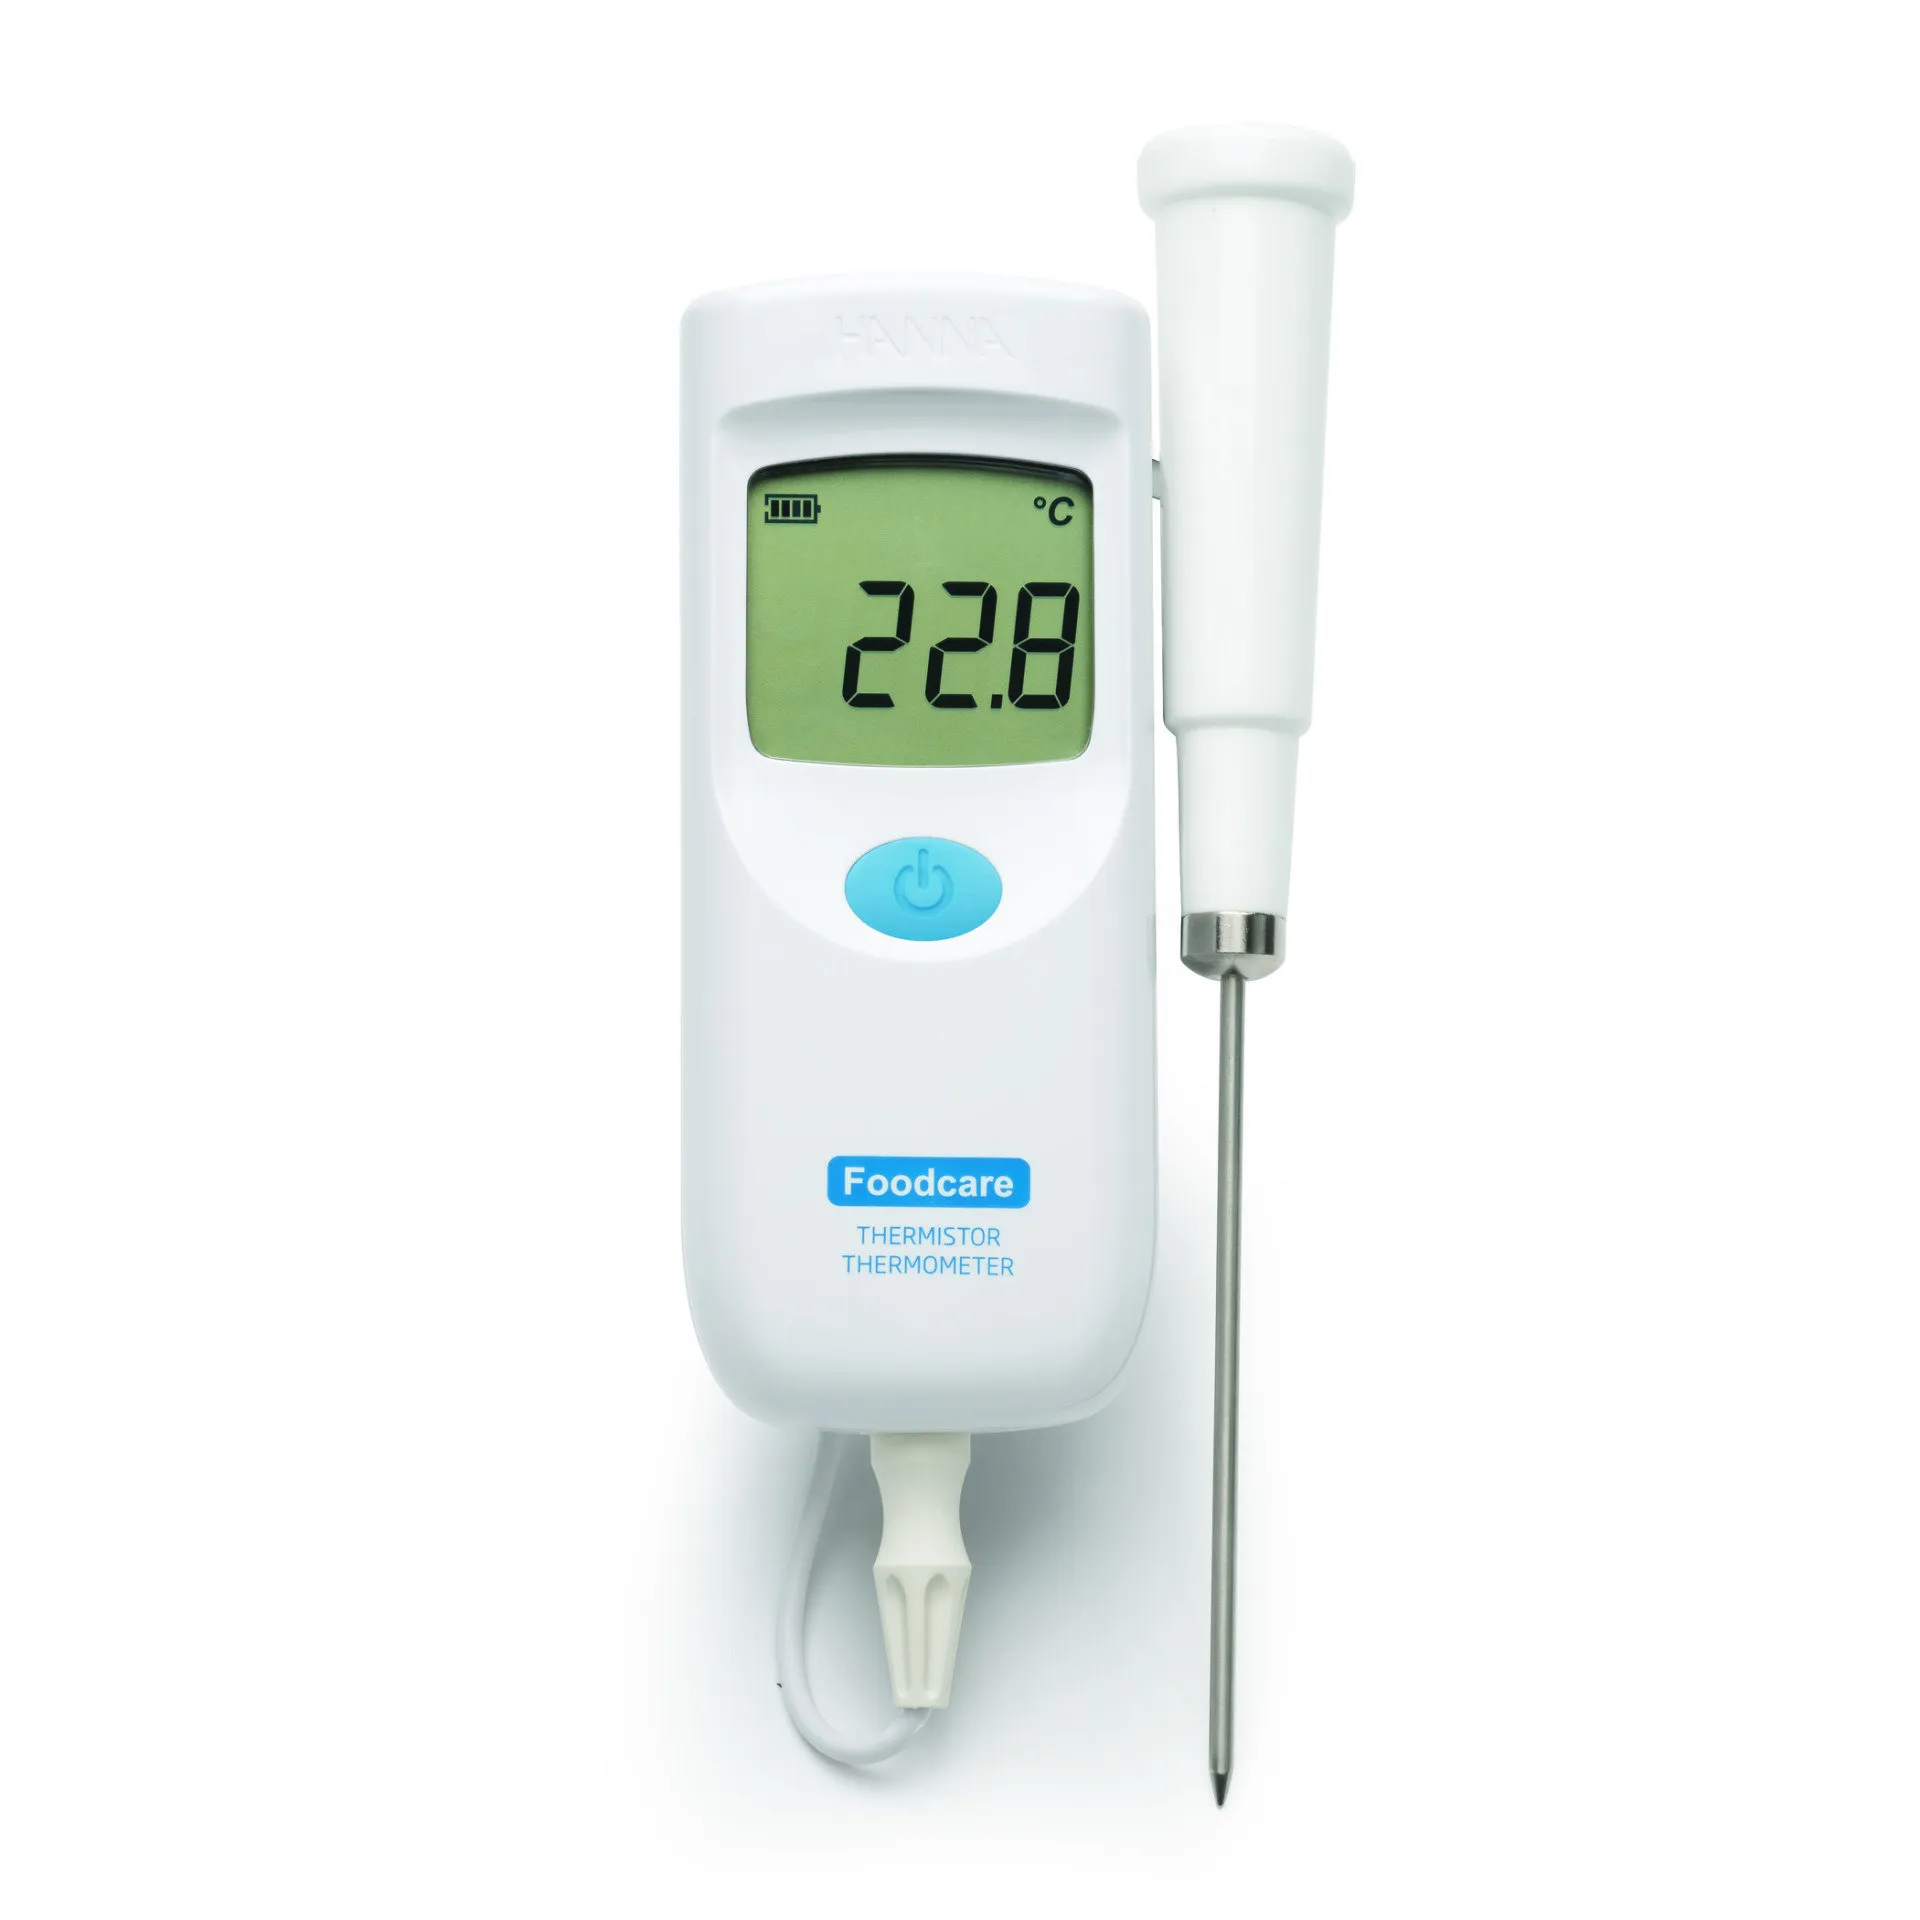 Foodcare calibrated food thermometer available in Ireland, ideal for checking tememperature of food in catering and restaurant kitchens